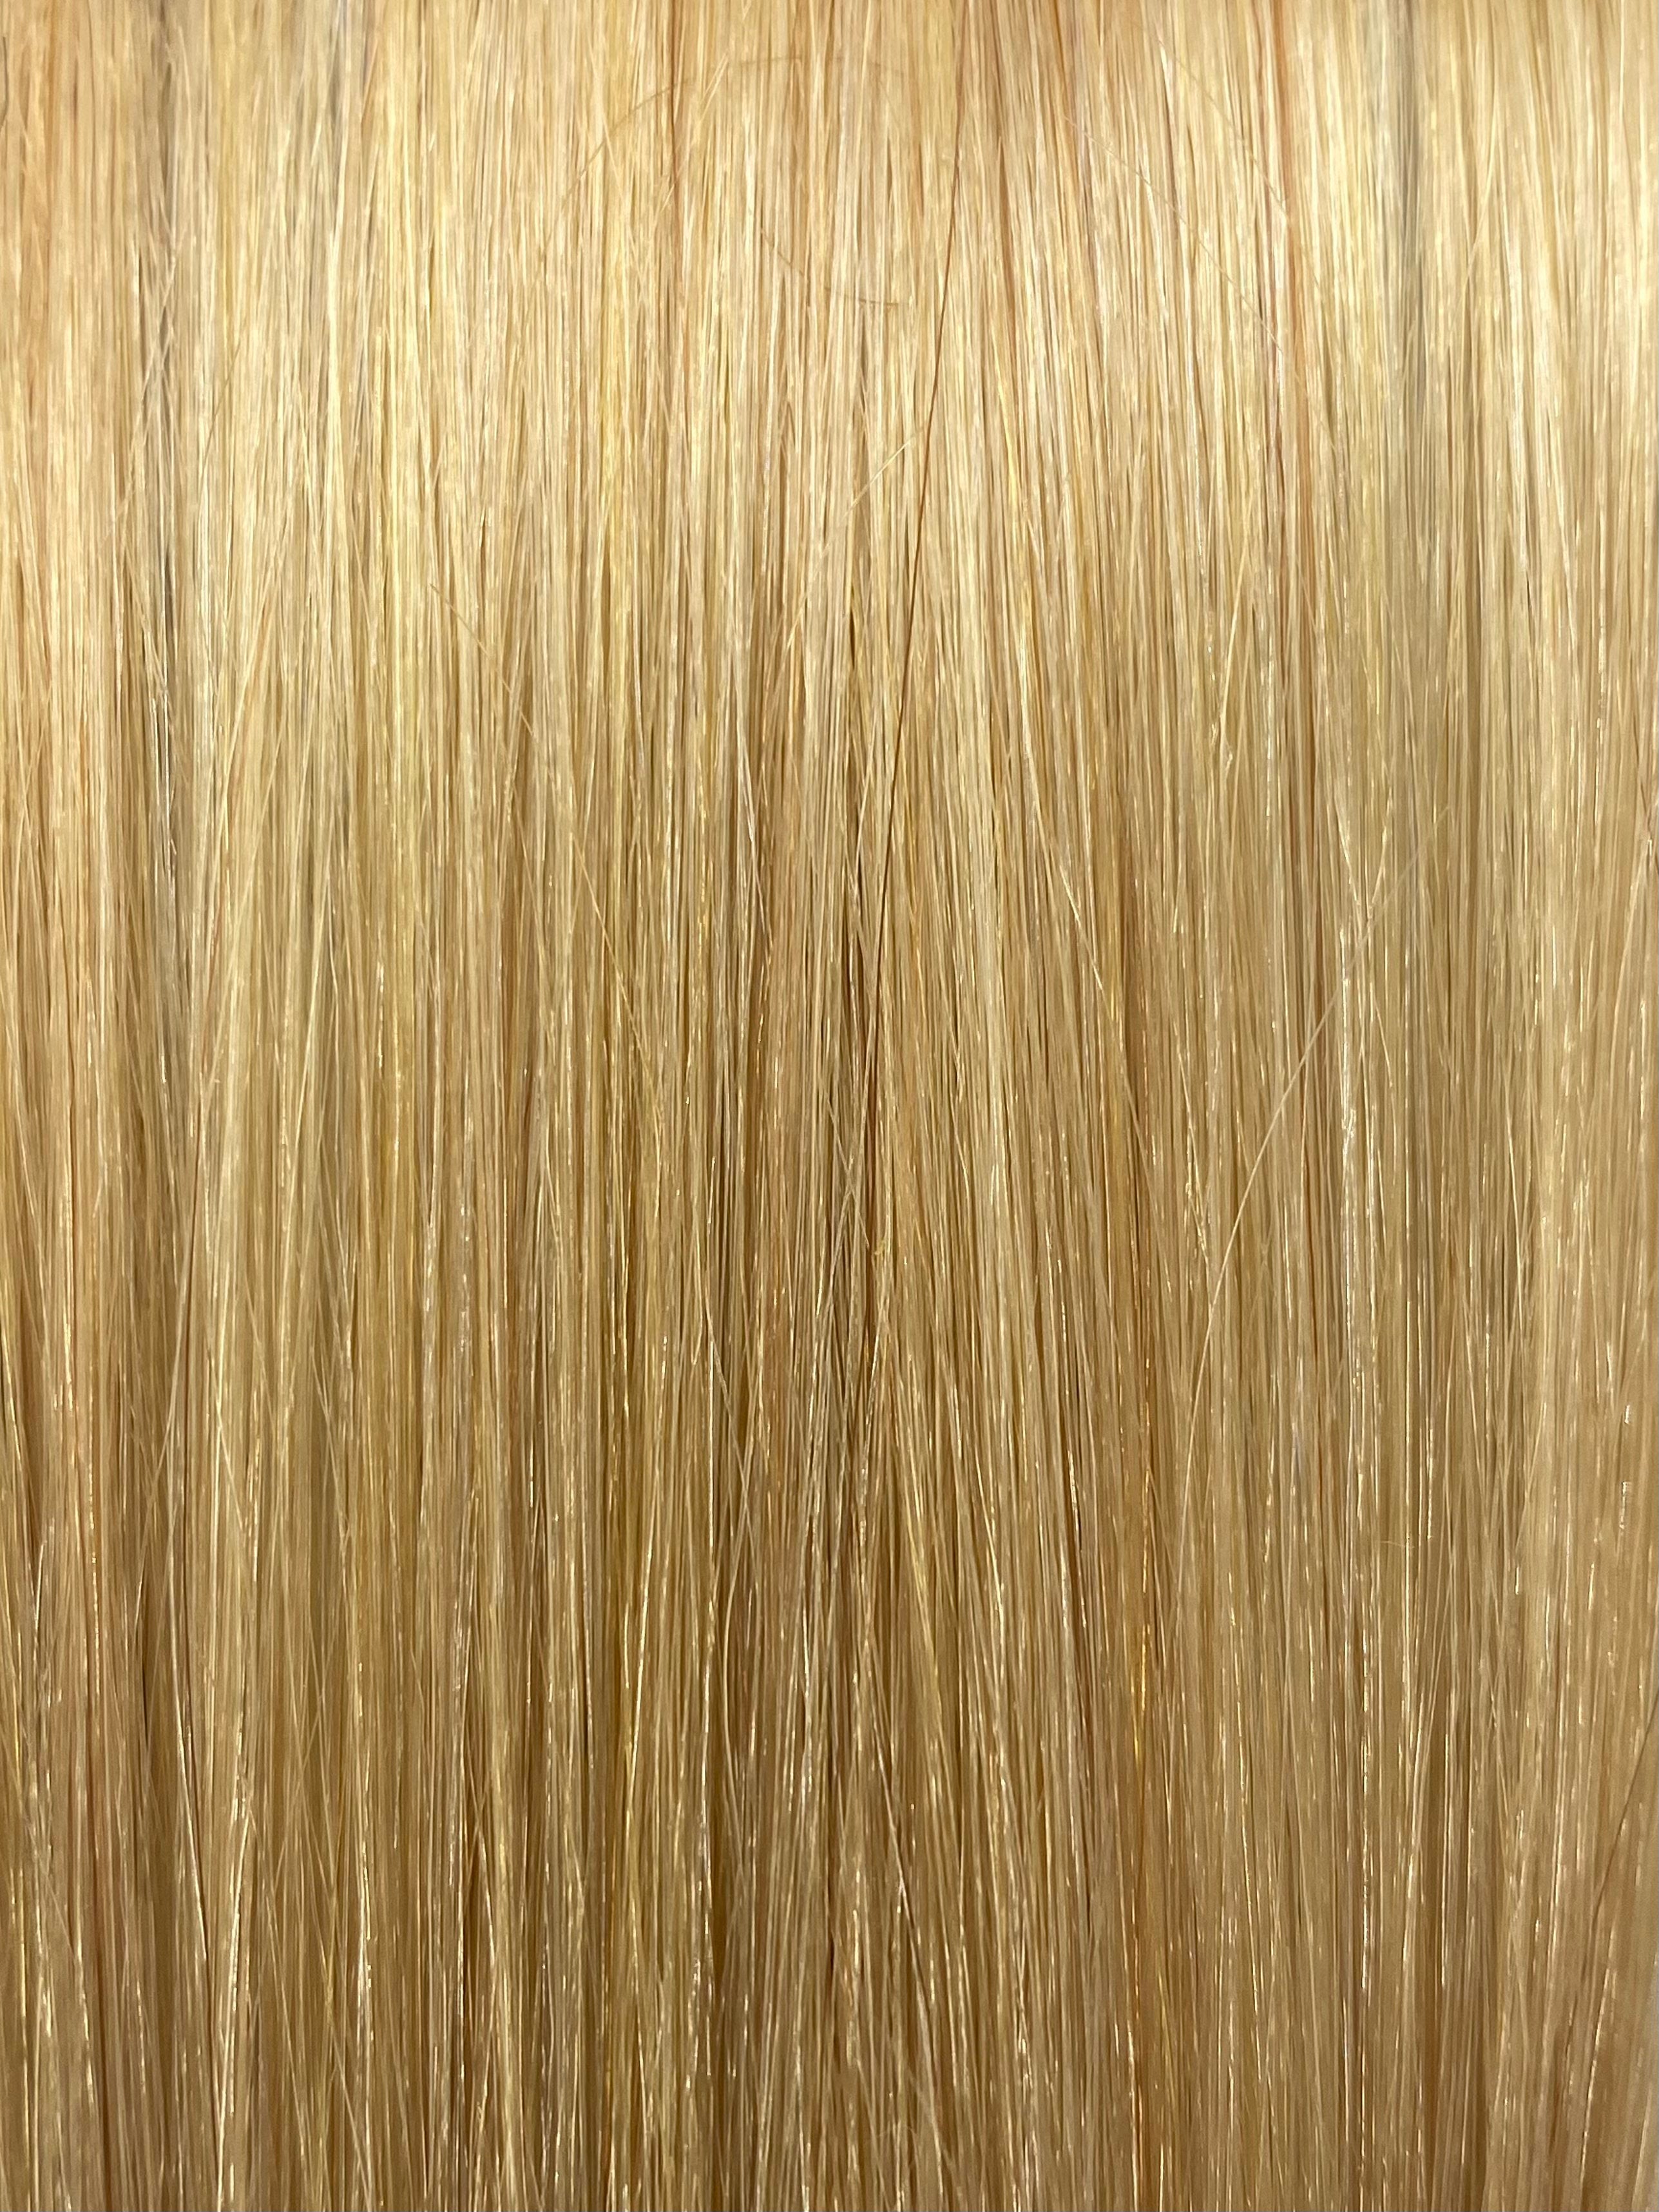 FUSION #DB2 LIGHT GOLDEN BLONDE 40CM/ 16 INCHES  -  17.5 GRAMS